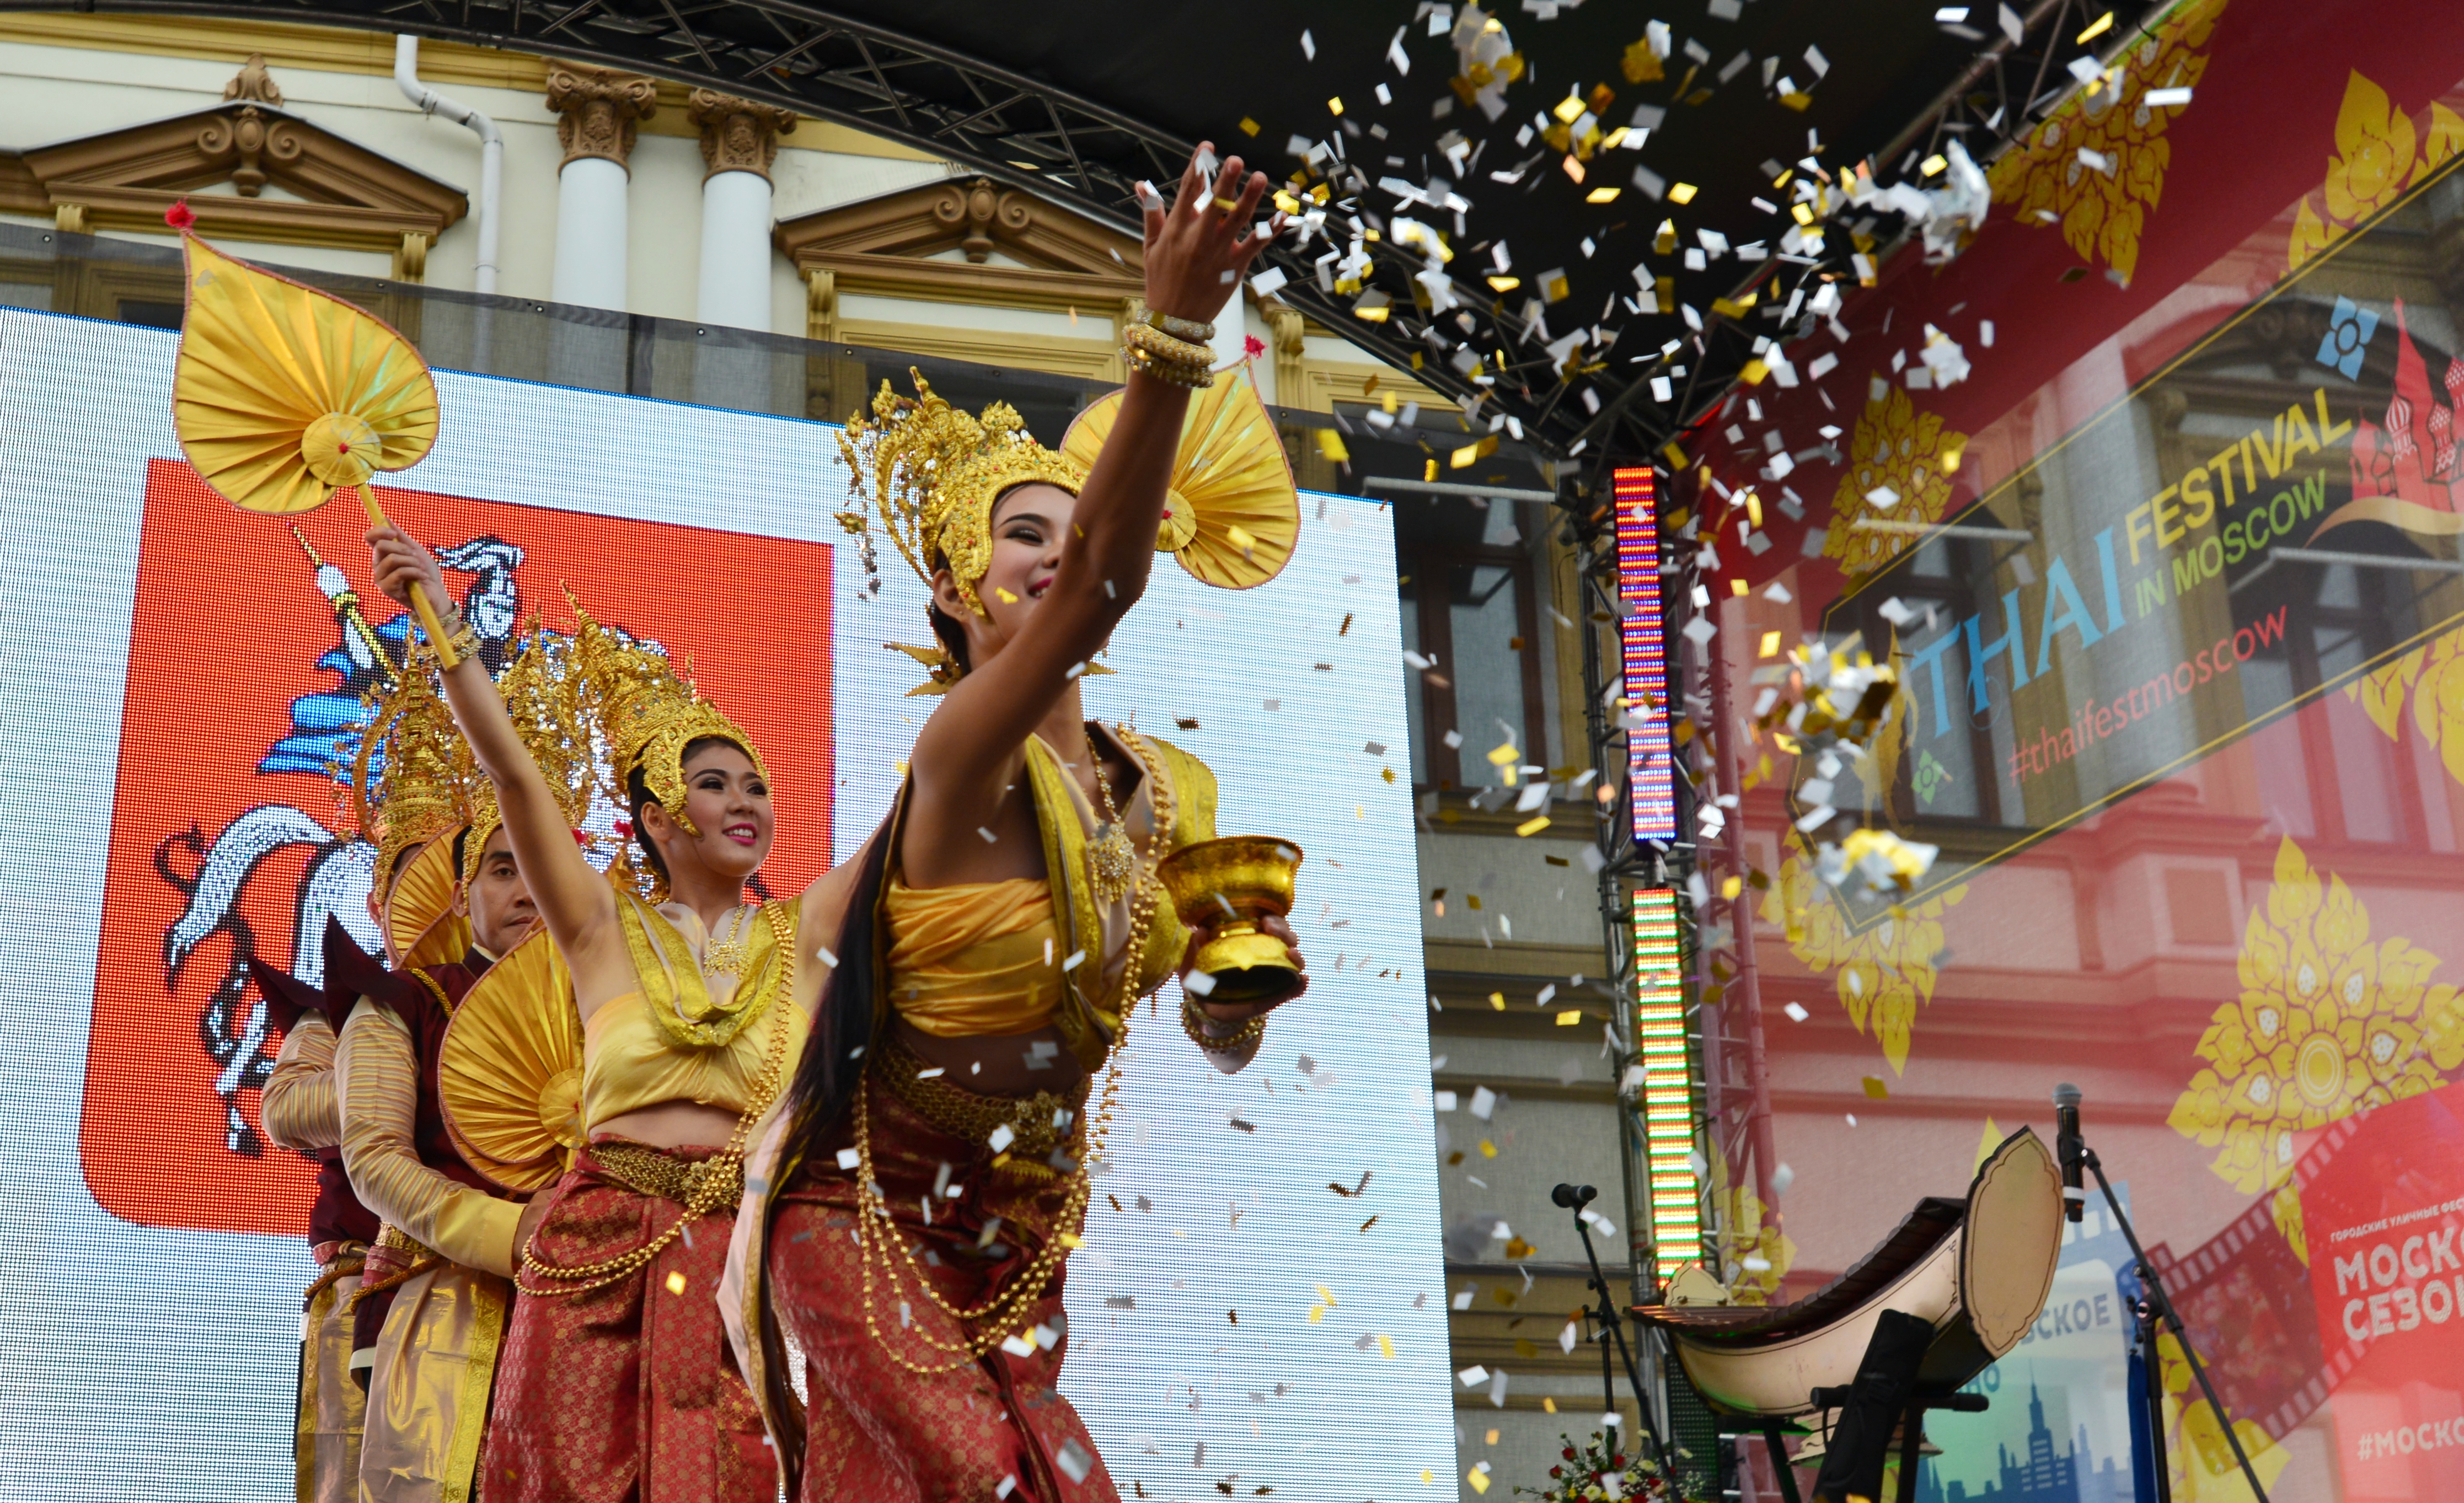 Russia welcome Thailand’s initiative to hold annual cultural festivals in Moscow’s city center. 